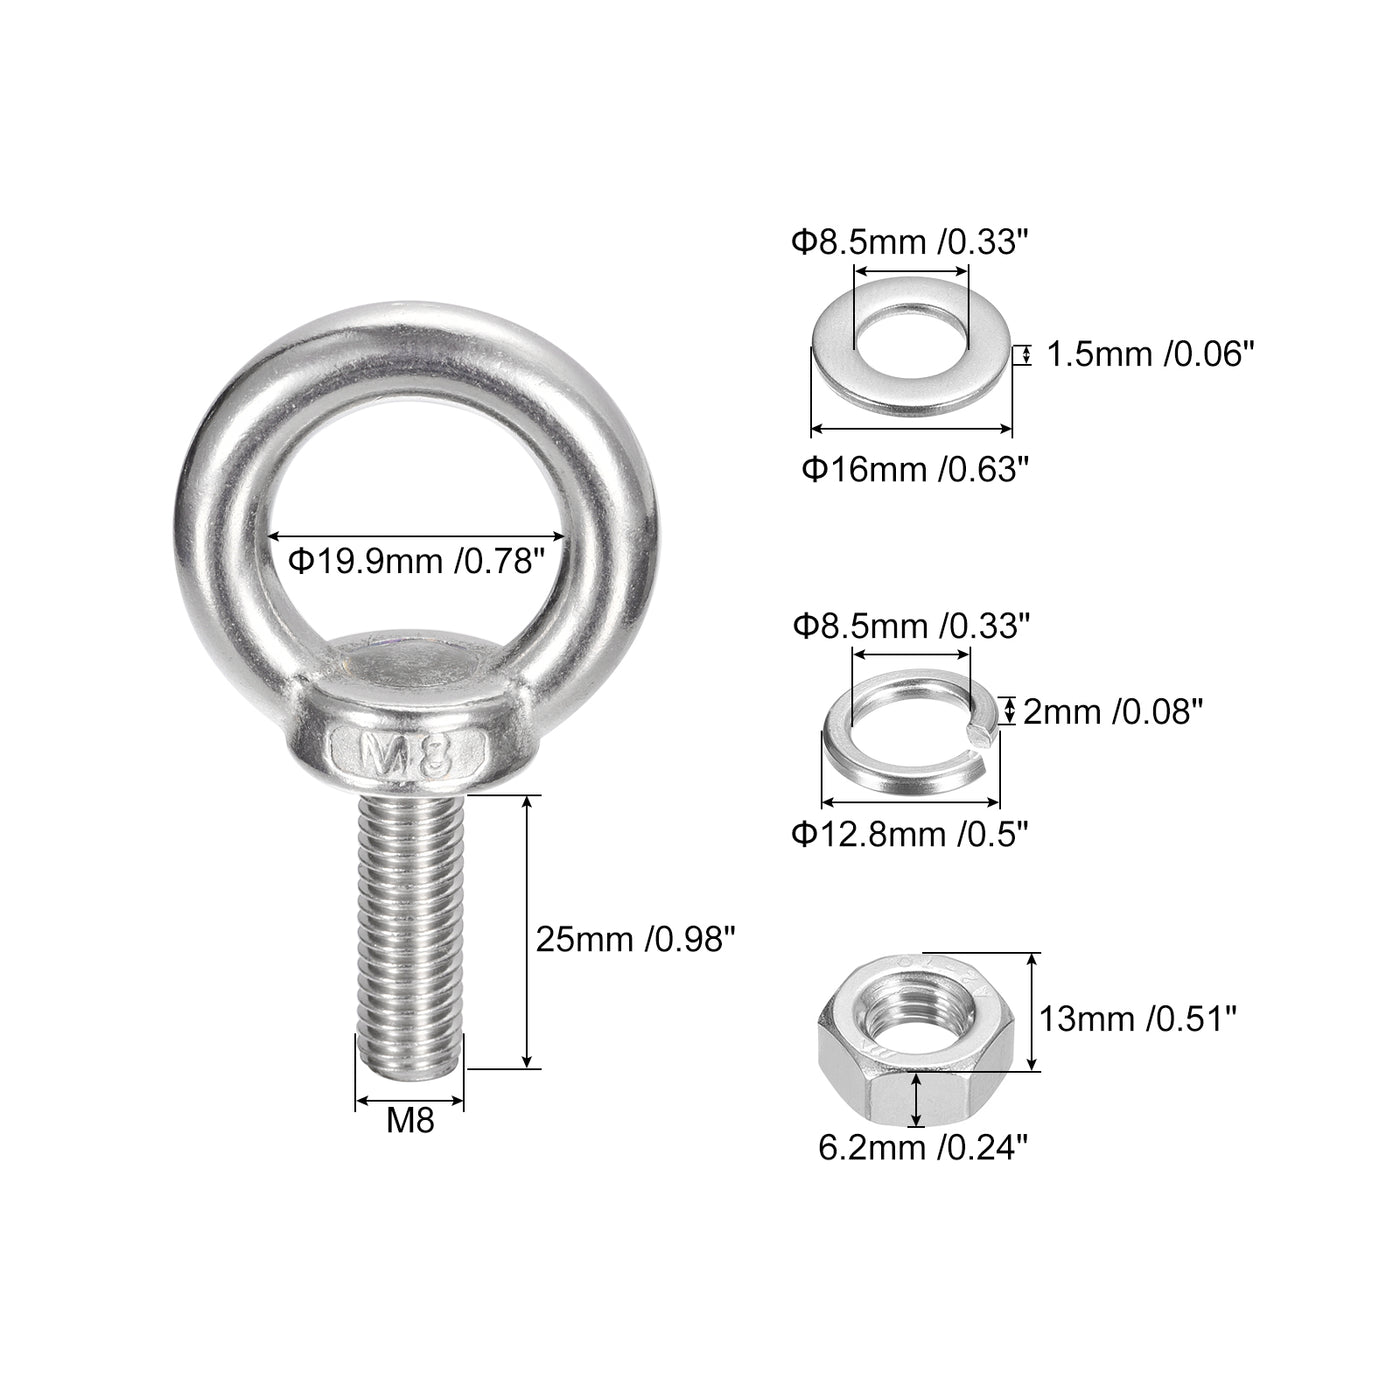 uxcell Uxcell Lifting Eye Bolt, 1 Set M8x25mm Eye Bolt with Nut Washer 304 Stainless Steel